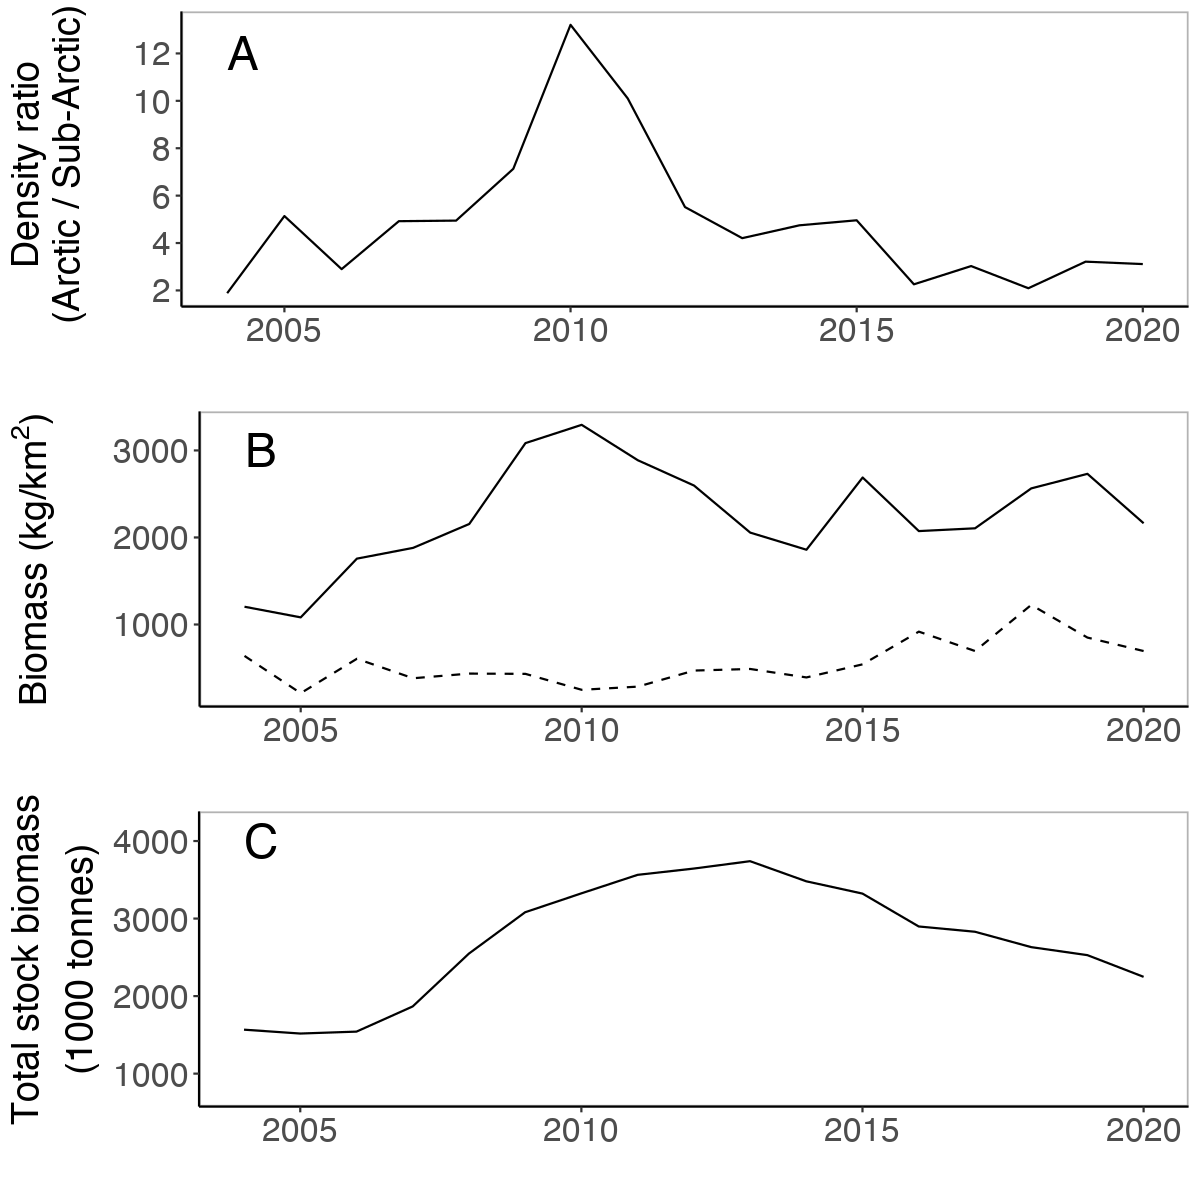 Figure A.26.3. Comparison of trend in average biomass density (kg/km 2 ) of cod in the Arctic part of the Barents Sea with densities in the Sub-Arctic part and with total stock biomass estimates (from ICES). A) Ratio of the mean density (kg/km2) of cod in the Arctic vs. the Sub-Arctic part within the Norwegian sector of the Barents Sea, from BESS in August-September. All values are larger than 1, indicating overall higher densities of cod in the Arctic compared to the Sub-Arctic part. B) Mean biomass density (kg/km 2 ) trends in Arctic (solid) and Sub-Arctic areas (stippled), from BESS in August-September. C) Total cod stock biomass estimates for the entire Barents Sea, from ICES.